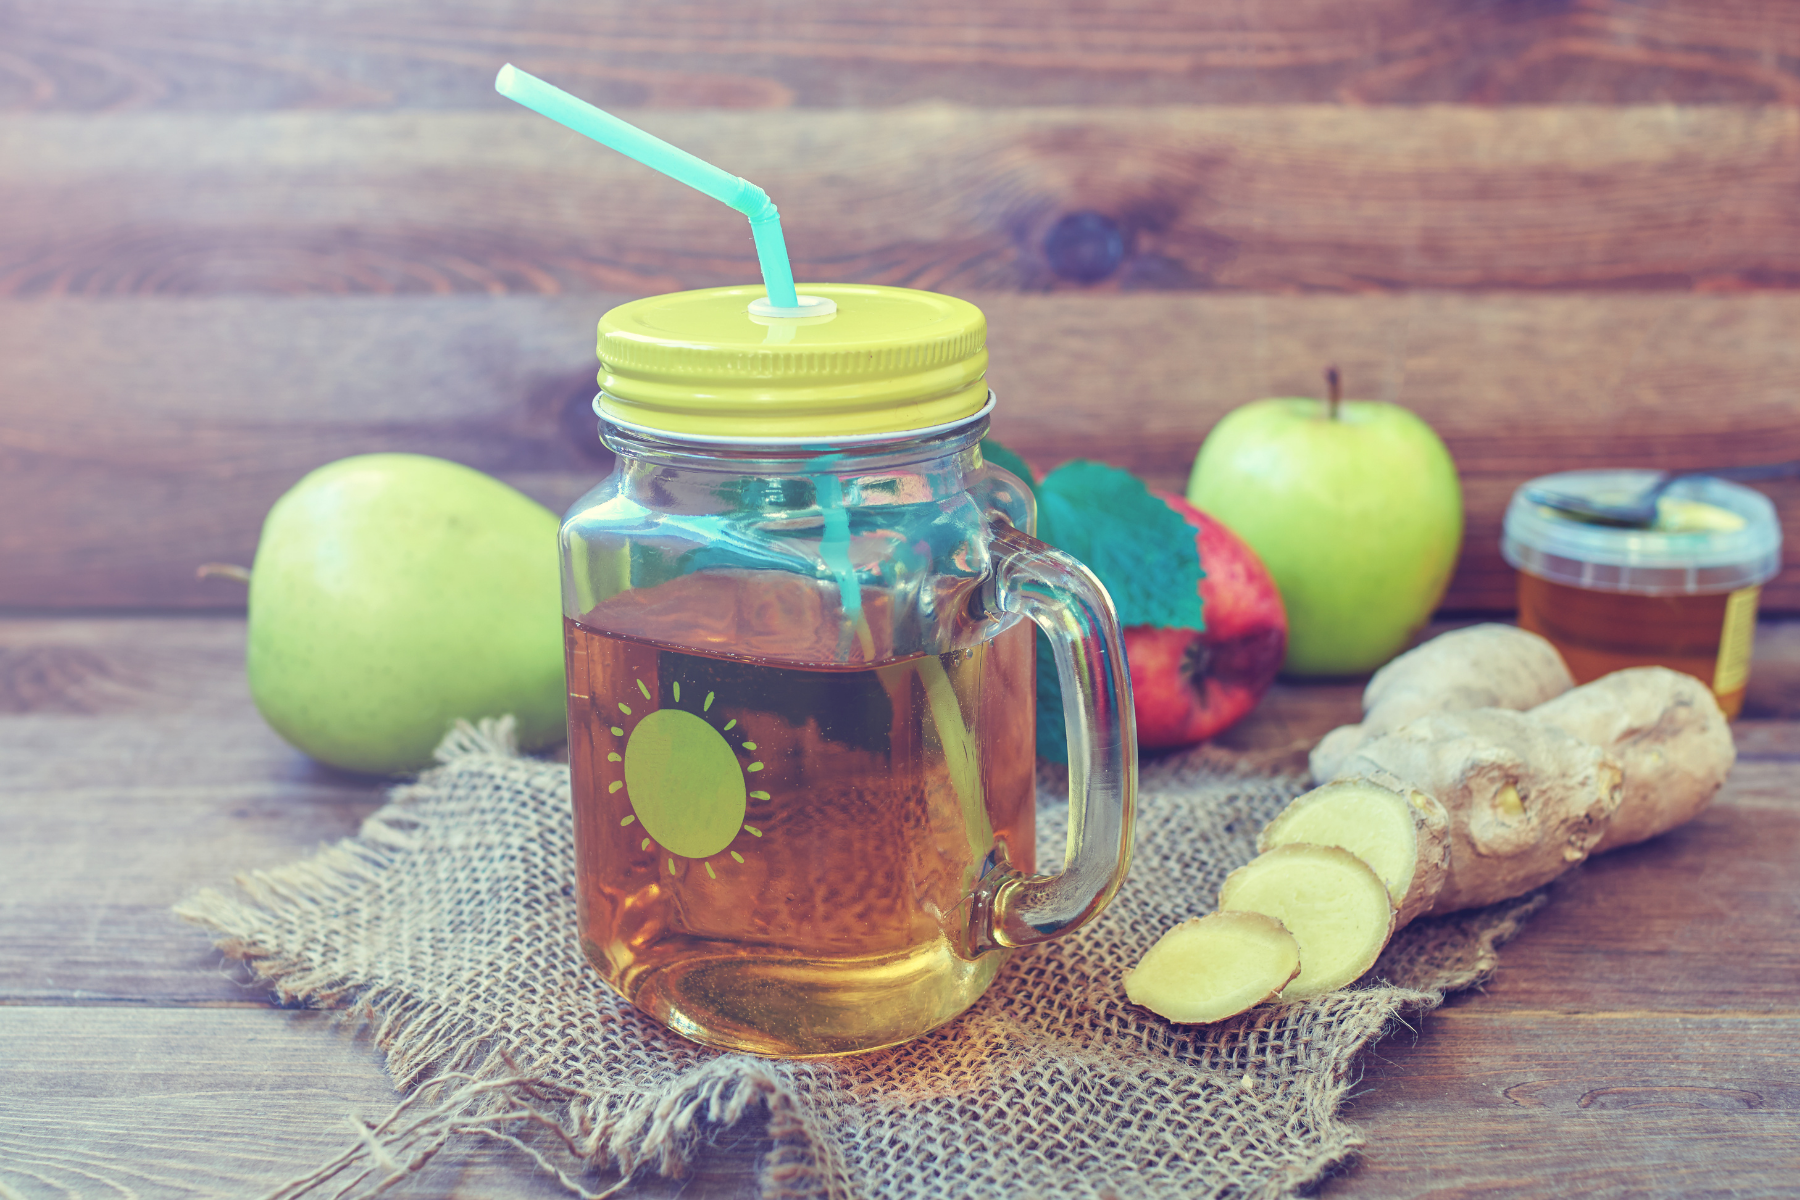 Made with apple cider vinegar, fresh ginger and raw honey, this tasty ACV drink may help support healthy digestion, immune system function and much more.